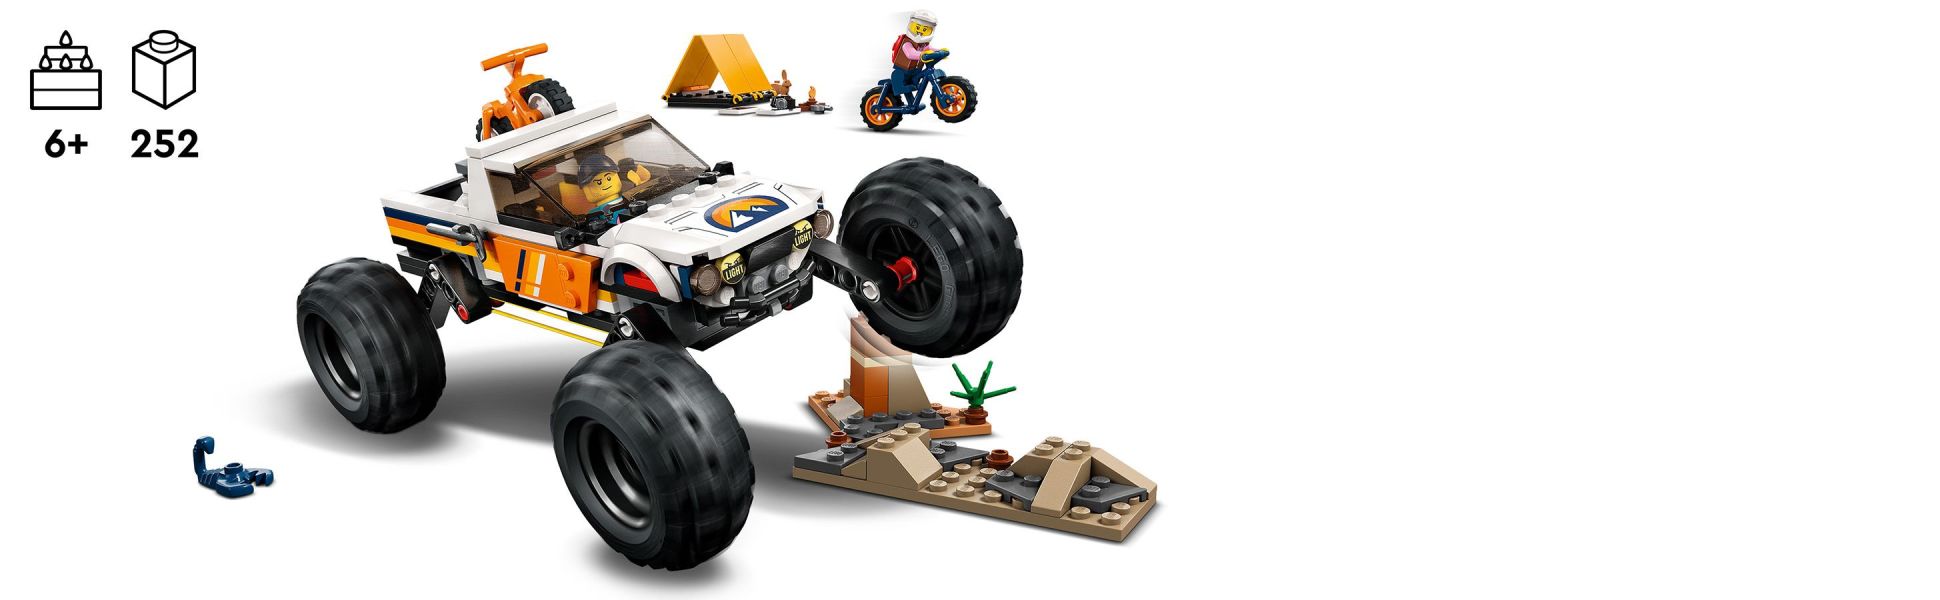 LEGO City 4x4 Off-Roader Kids Including Toy Bikes, Vehicle 60387 6+ 2 for Ages Mountain and Style Car - with Suspension Building Monster Minifigures, Truck Set Working Adventures Toy Camping